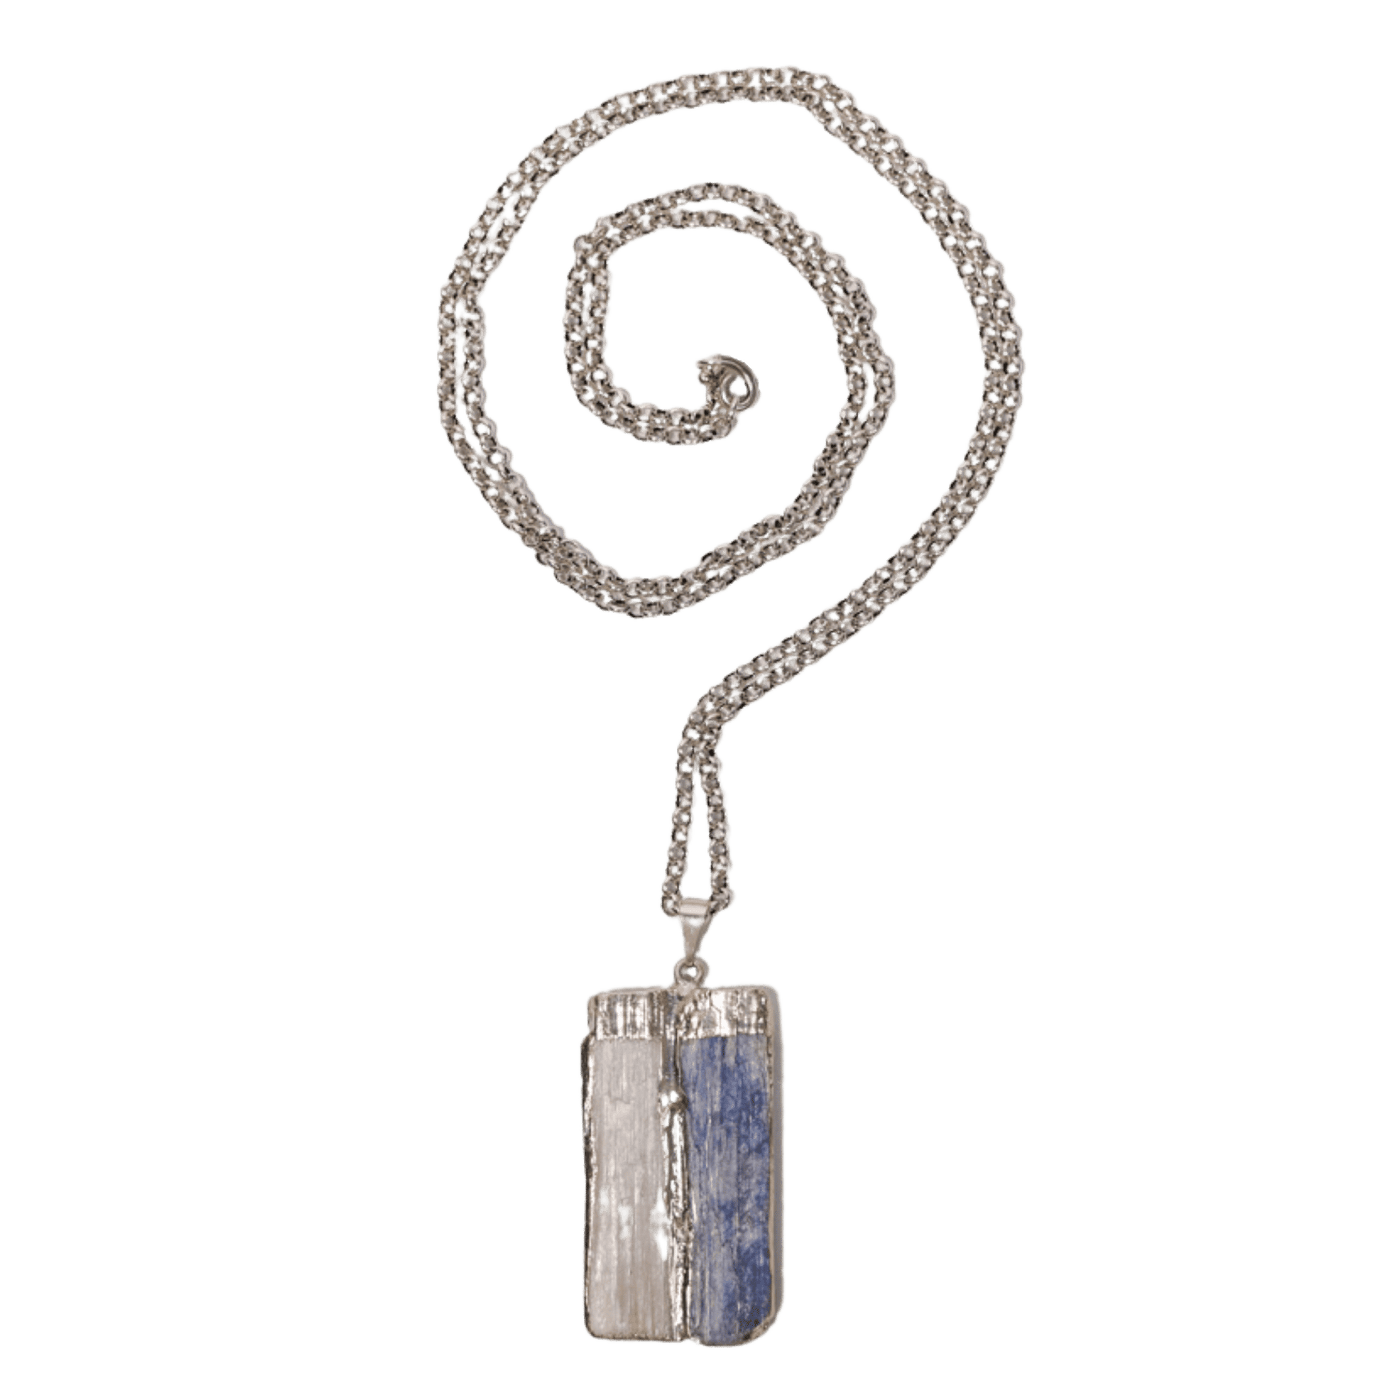 genuine Blue Kyanite and Selenite pendant on sterling silver necklace by Energy Muse